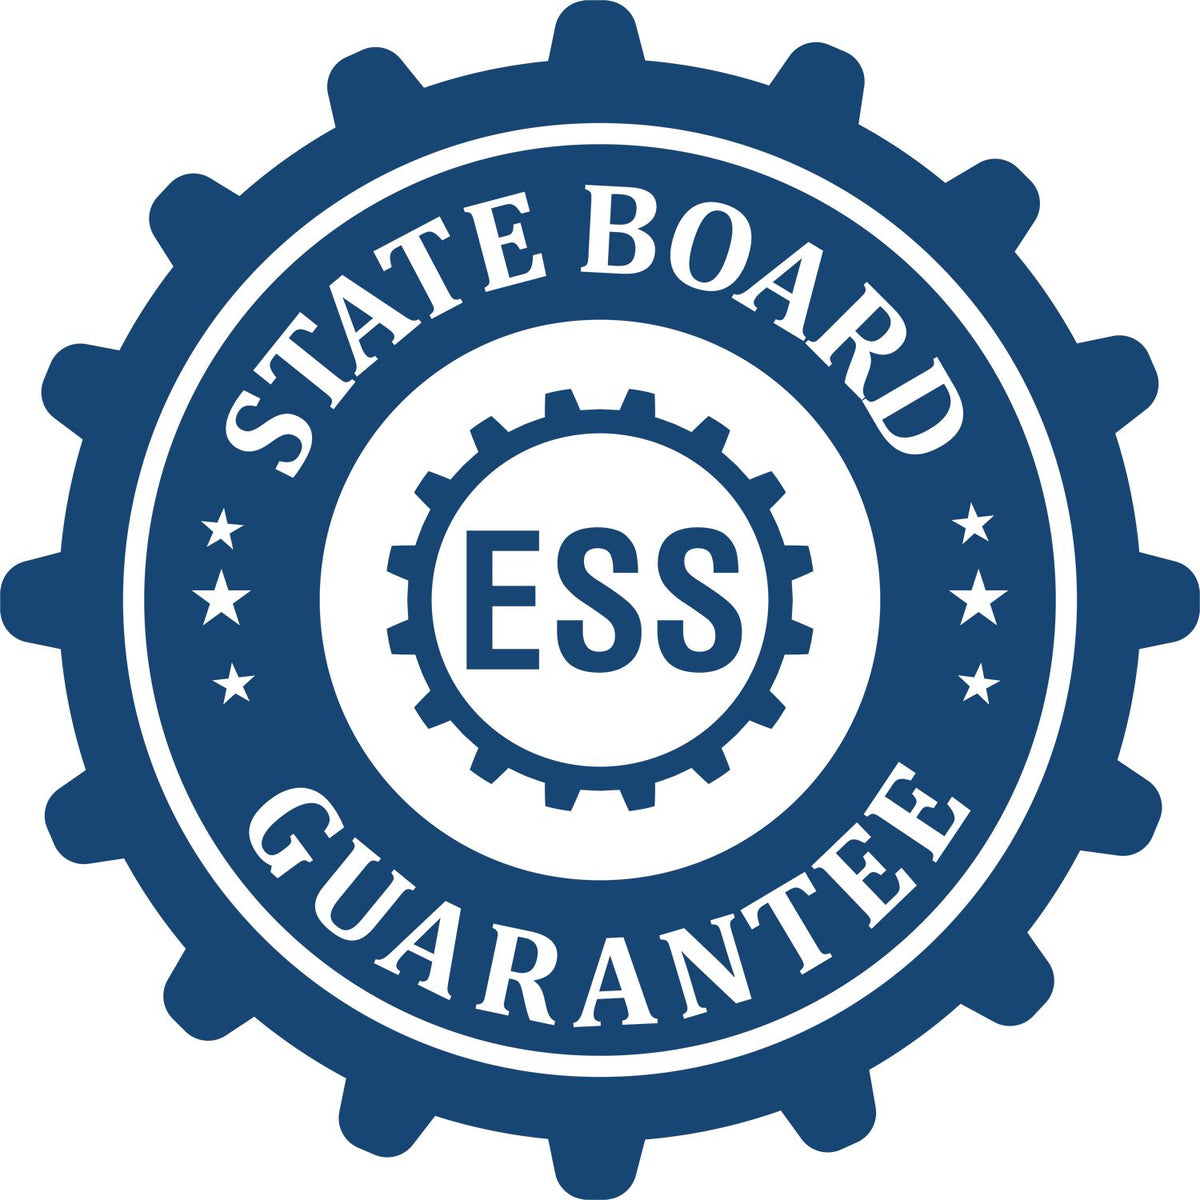 An emblem in a gear shape illustrating a state board guarantee for the Hybrid Tennessee Engineer Seal